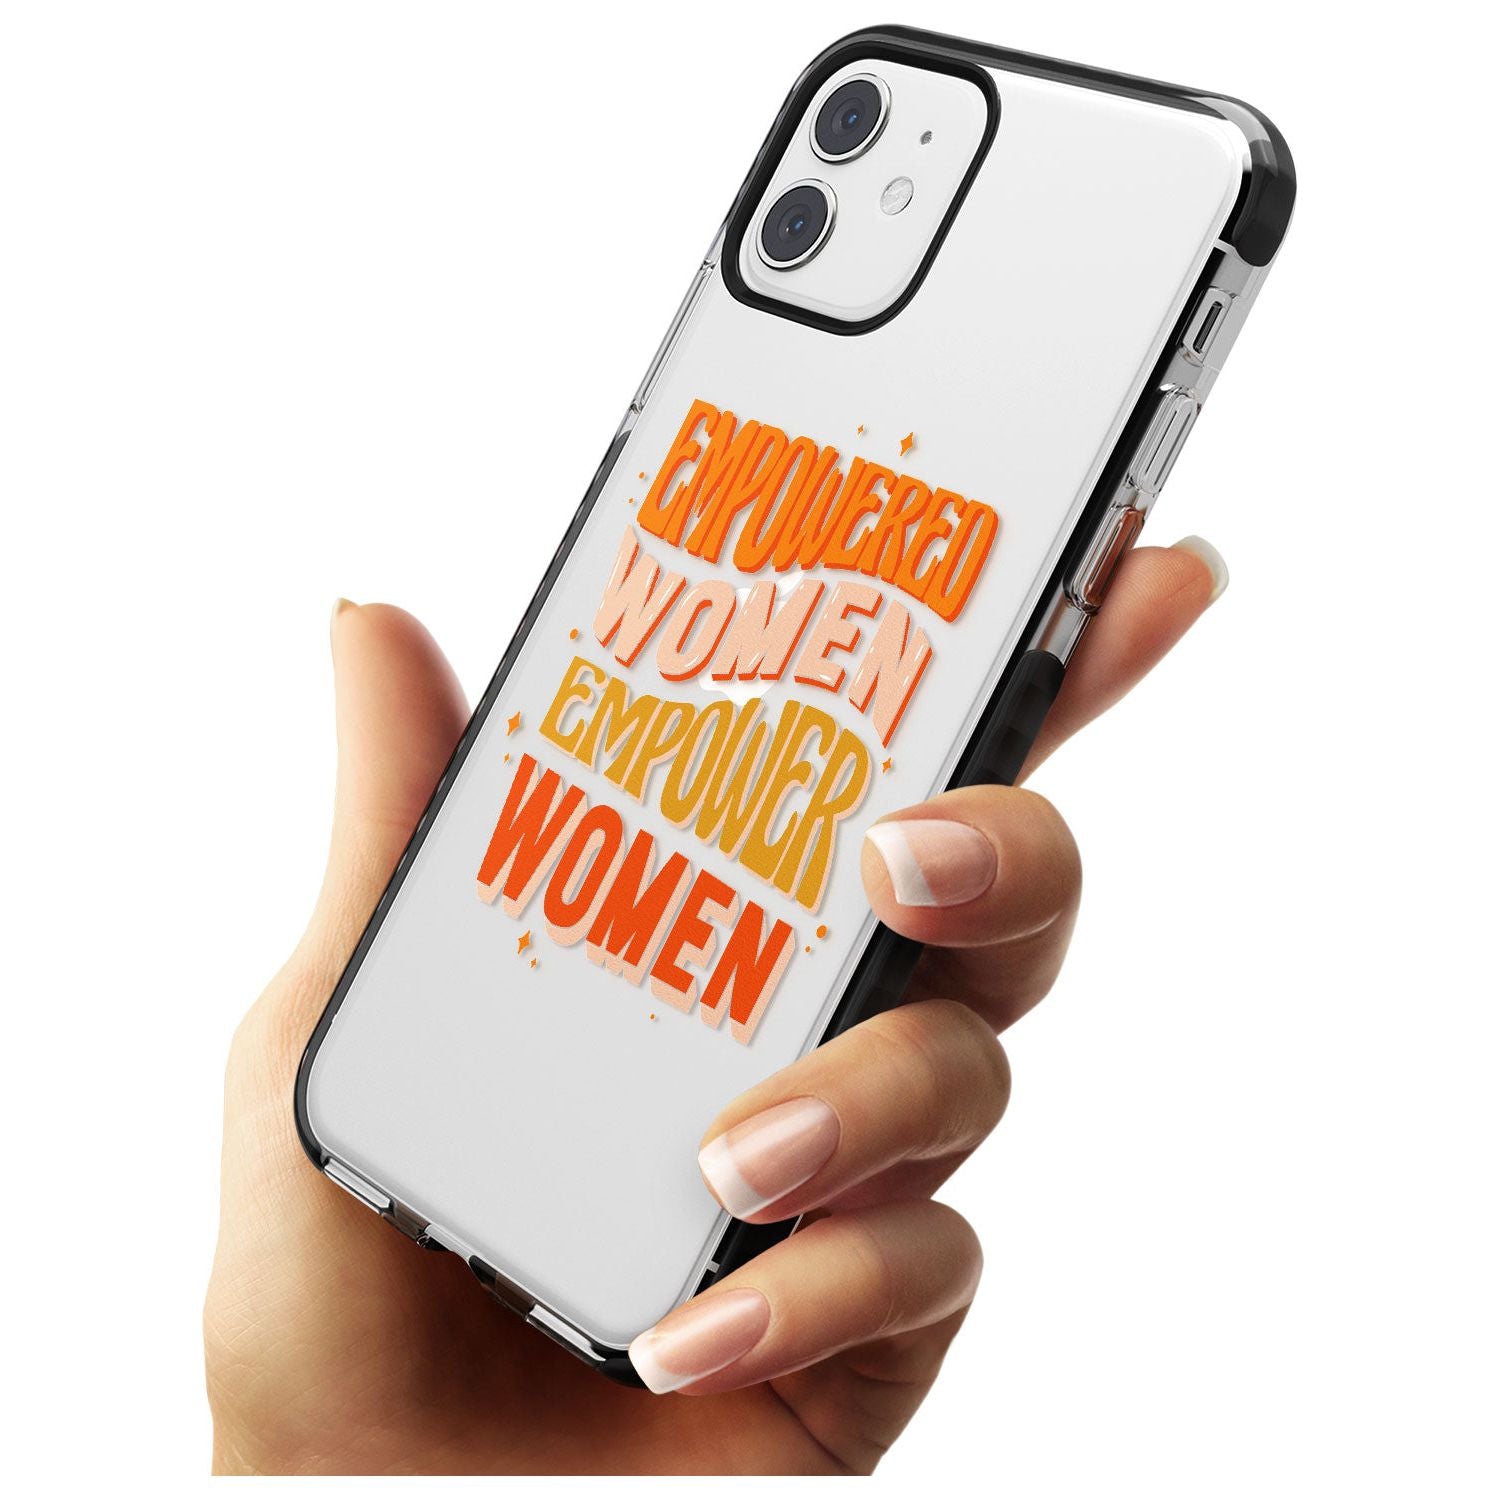 Empowered Women Black Impact Phone Case for iPhone 11